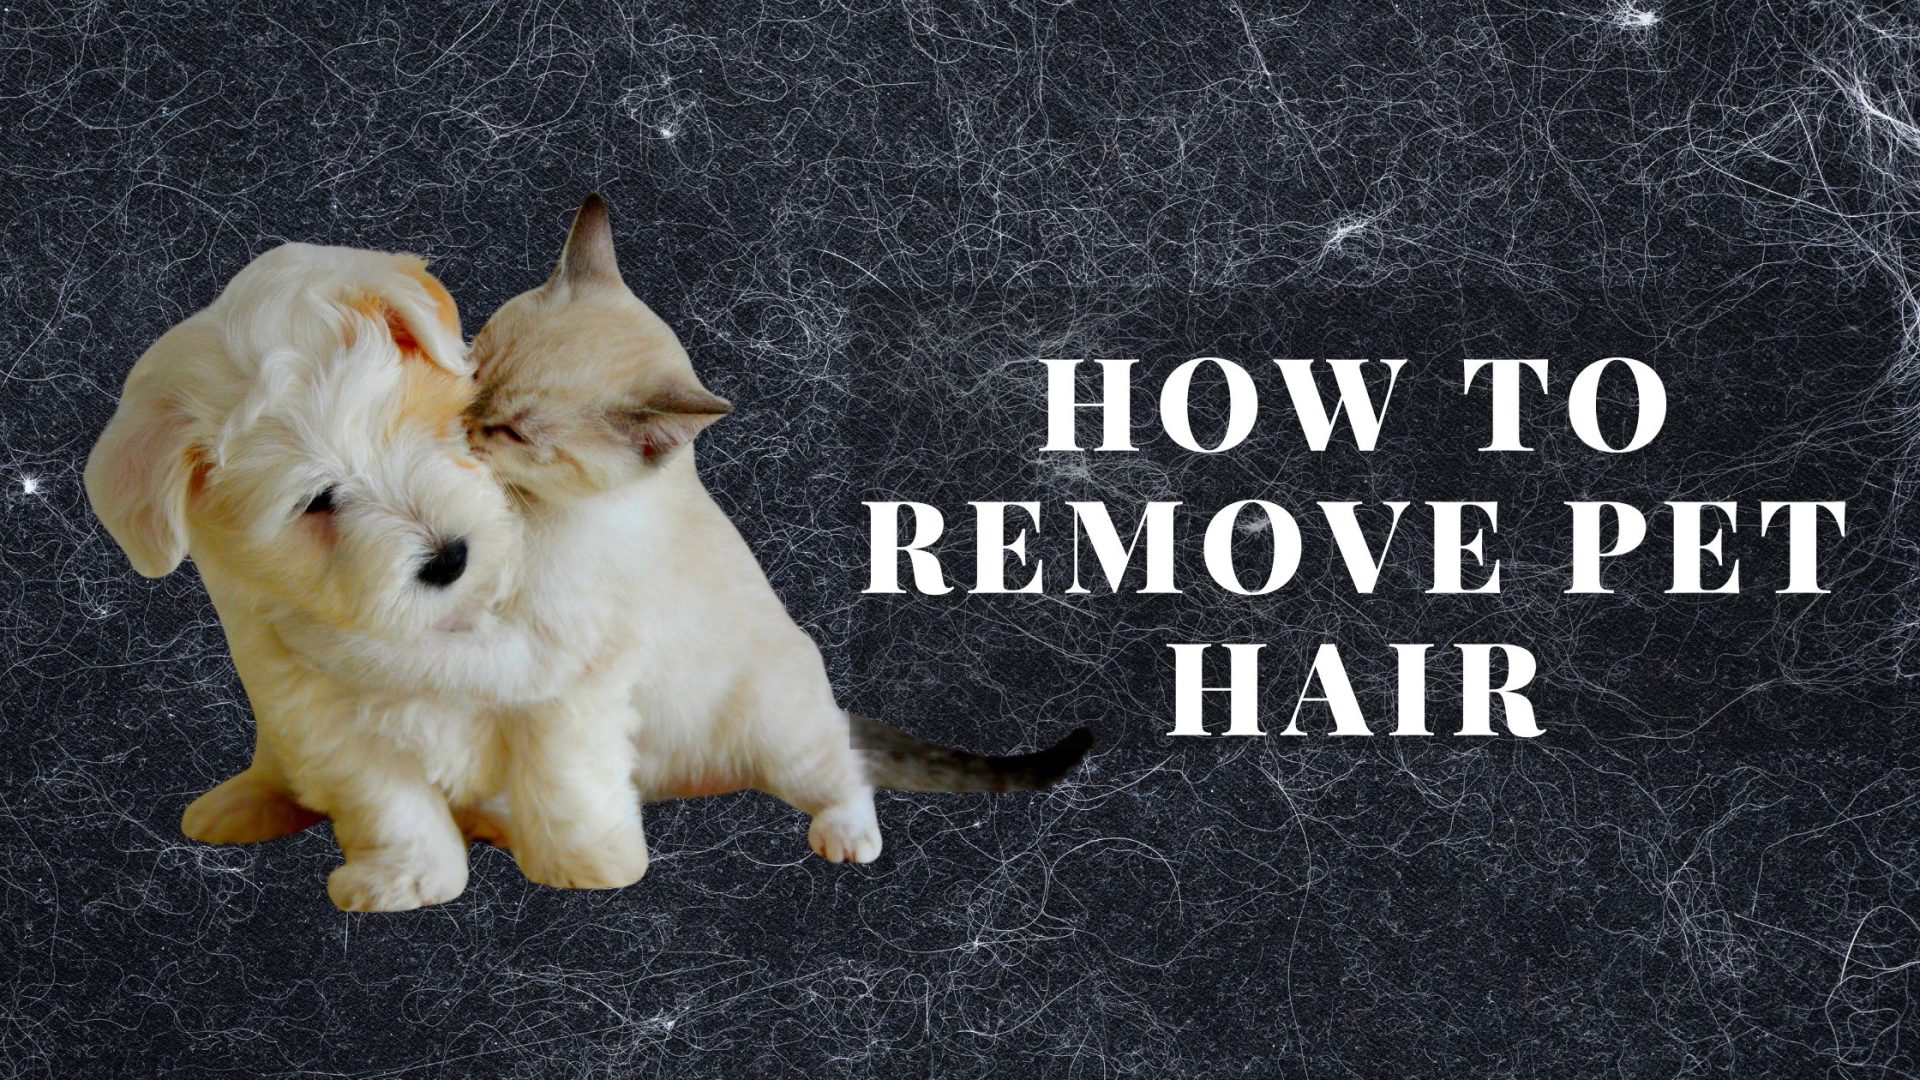 How to Remove Pet Hair from Clothes